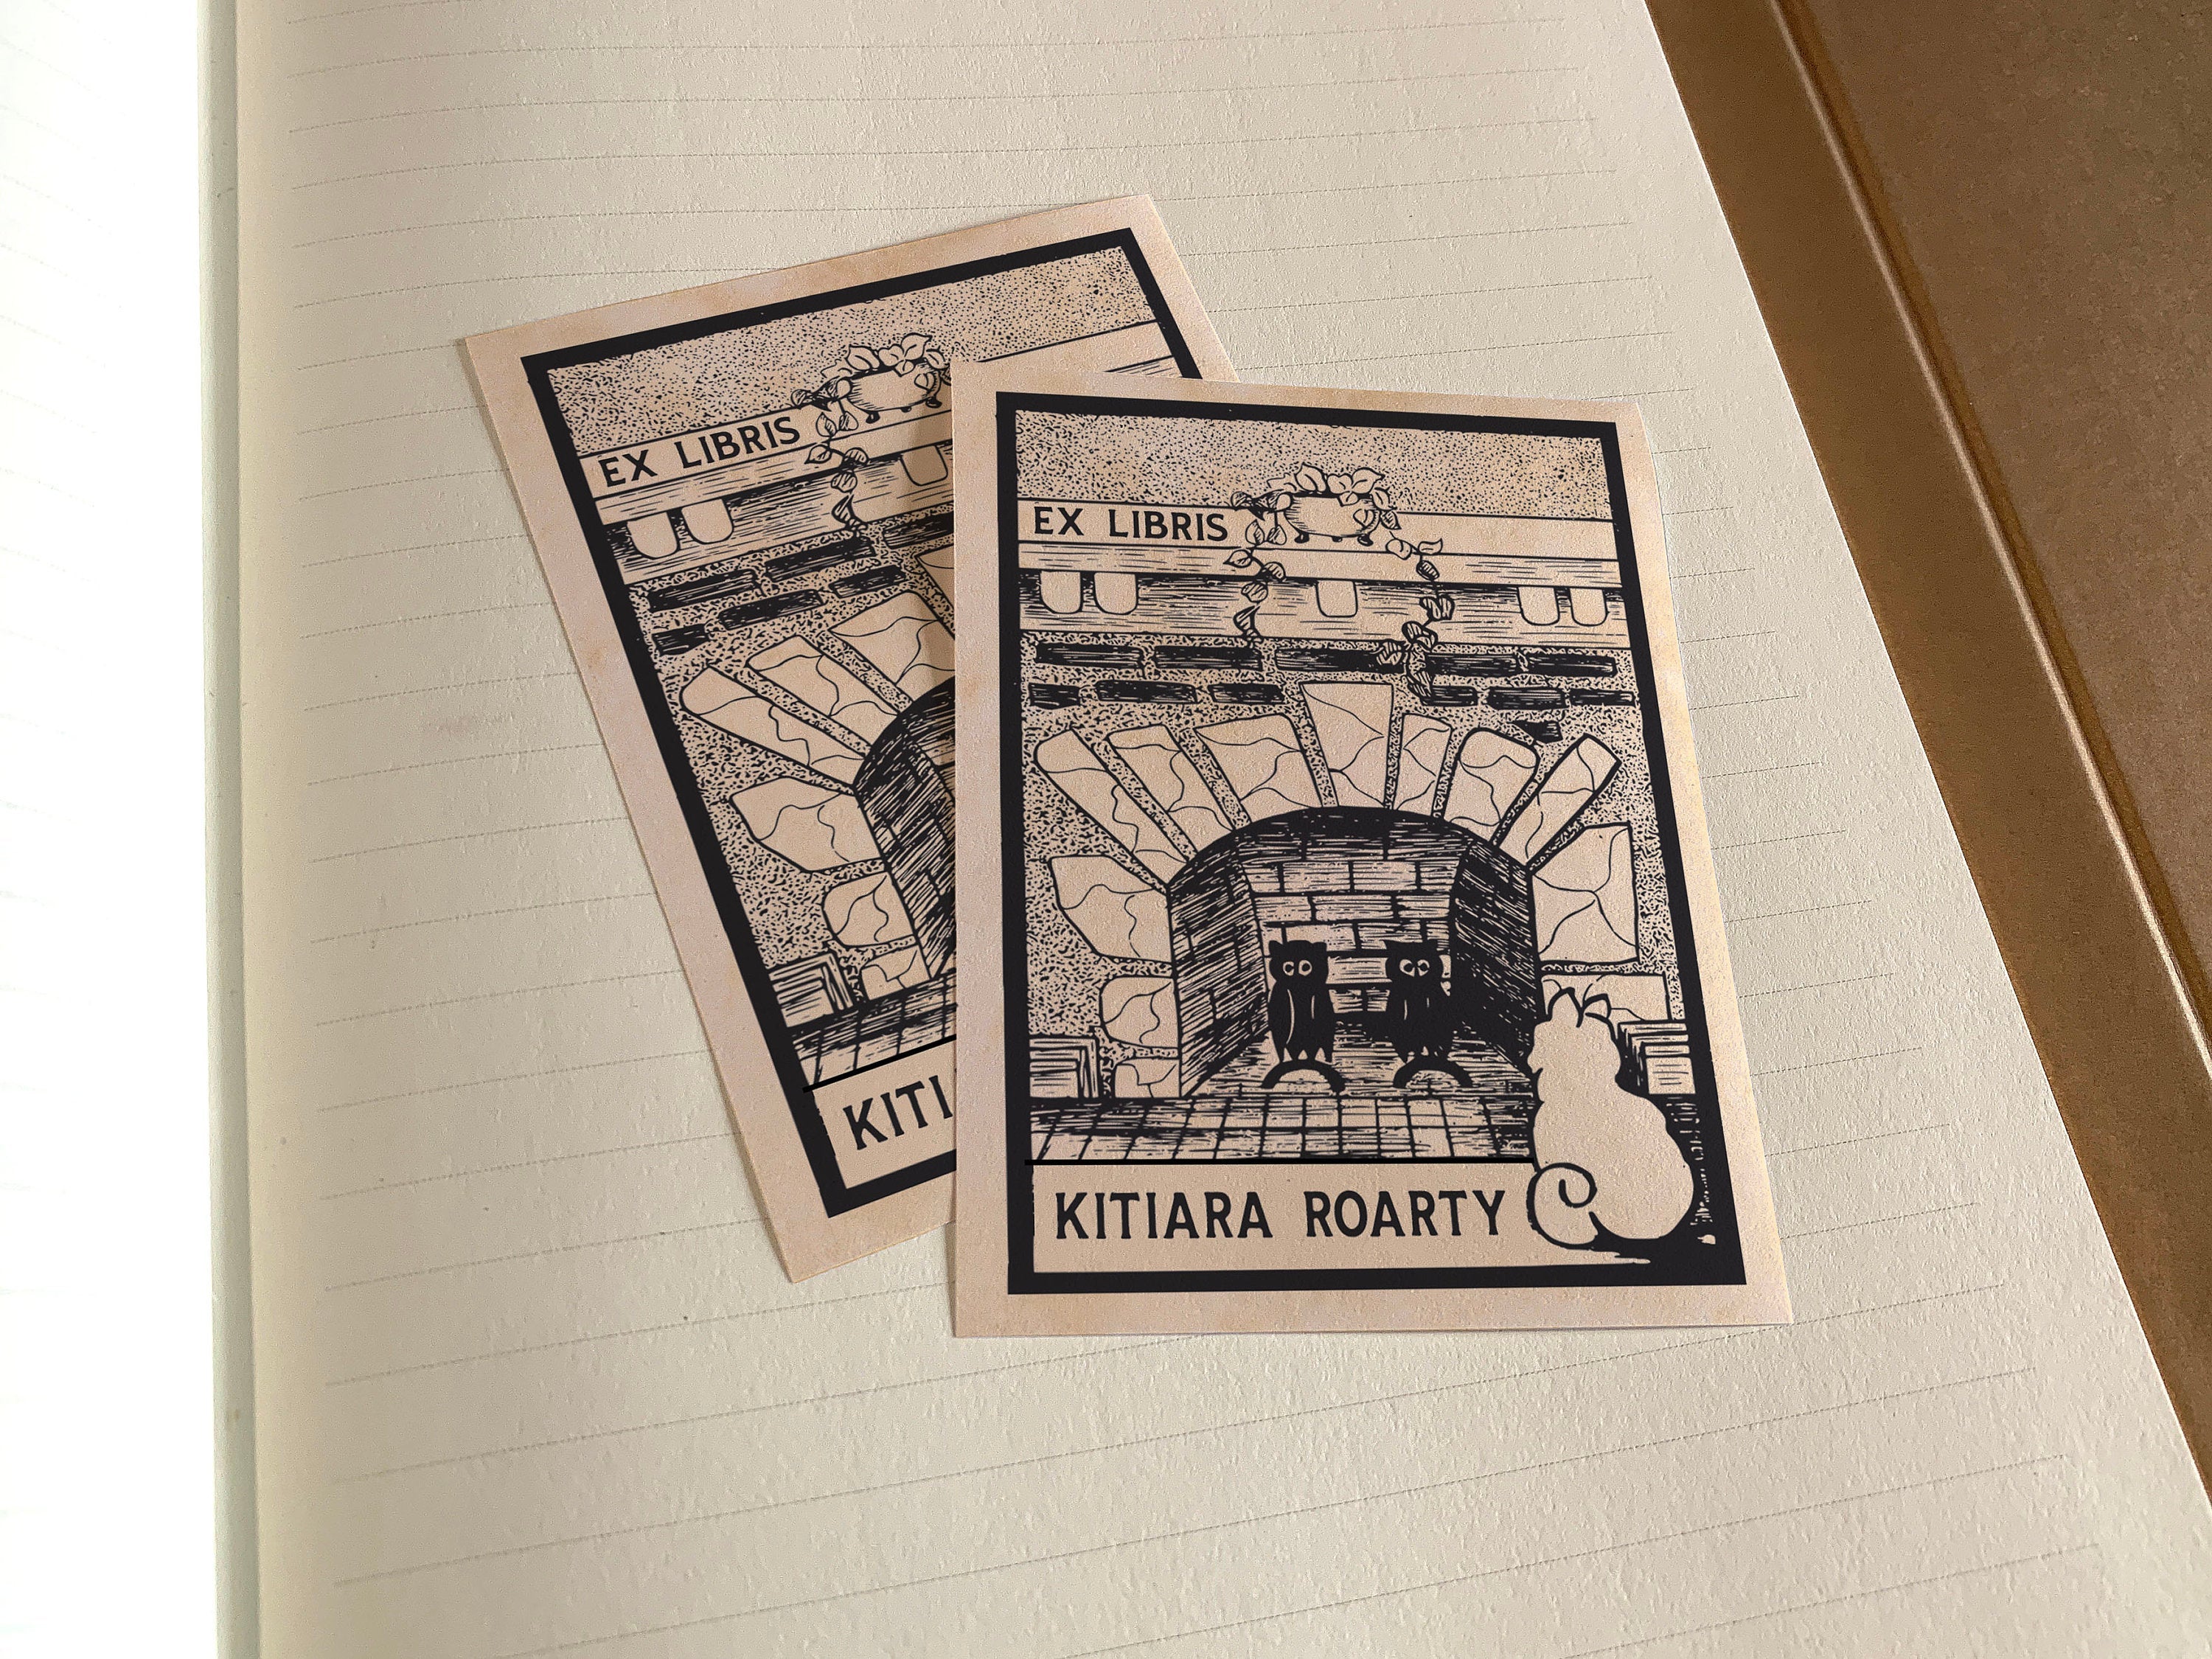 Cat and Fireplace, Personalized Ex-Libris Bookplates, Crafted on Traditional Gummed Paper, 3in x 4in, Set of 30